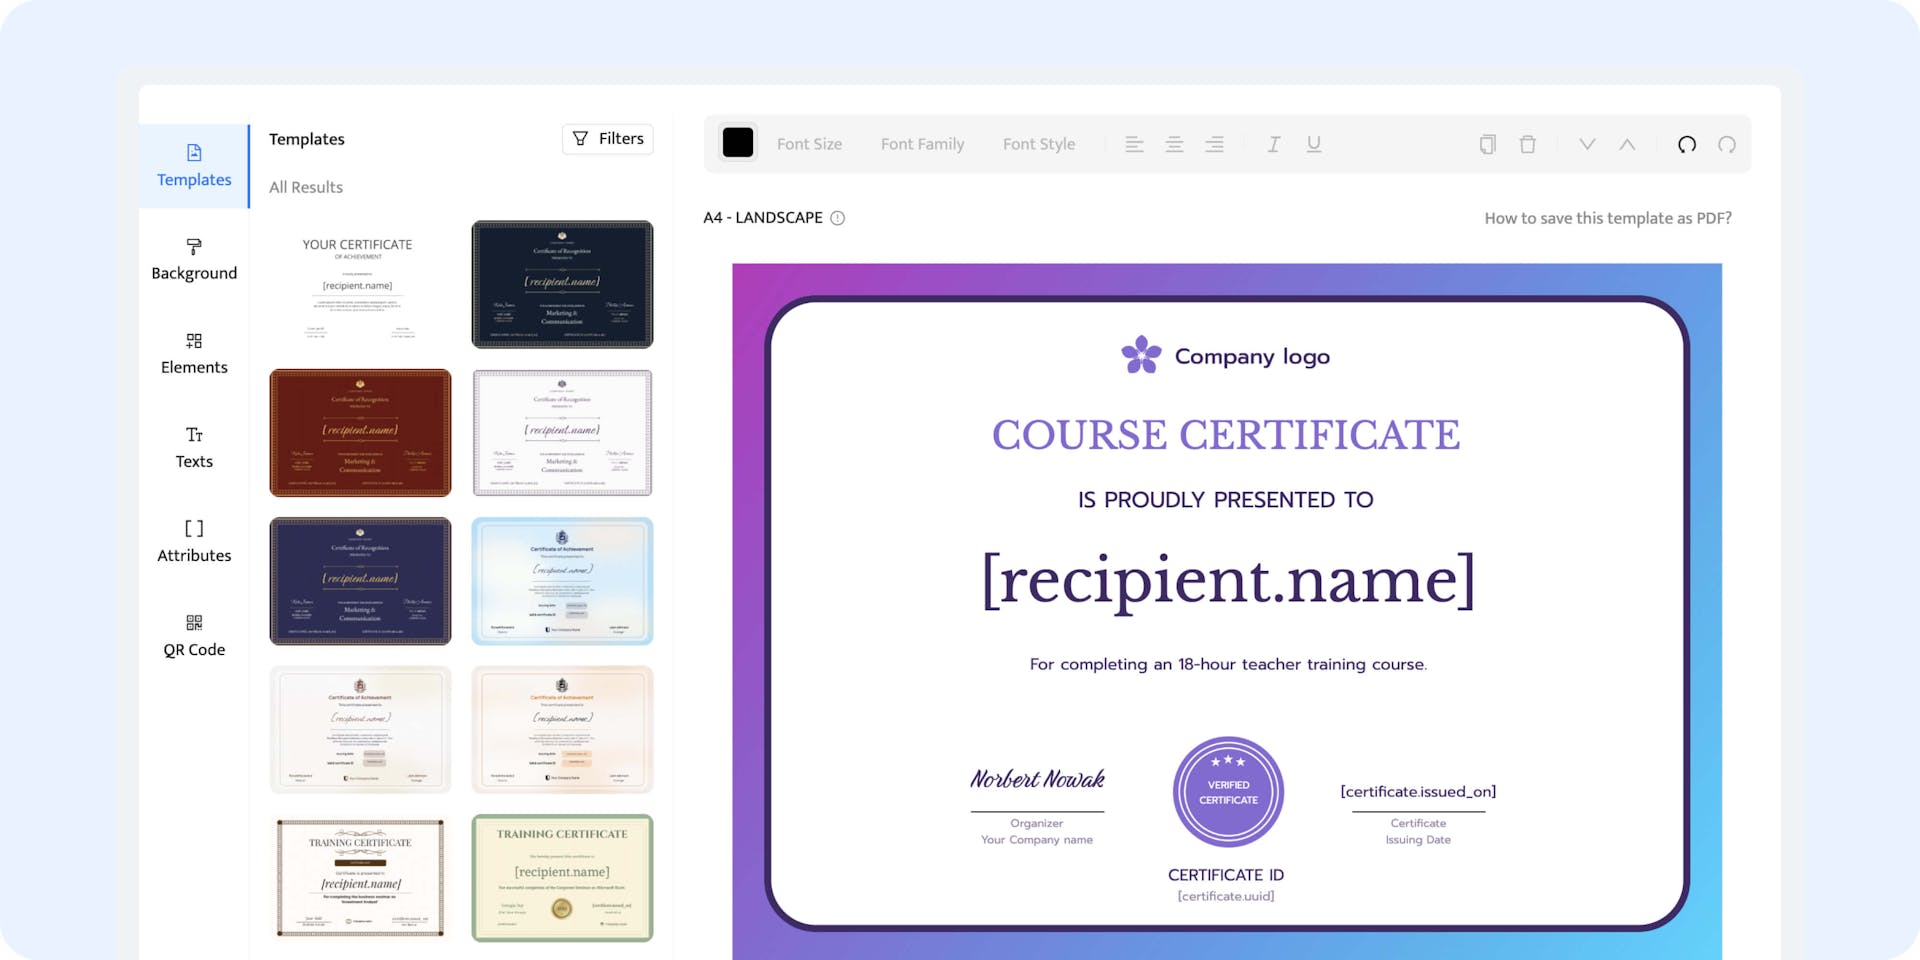 Choosing certificate templates that suits best as PDF.